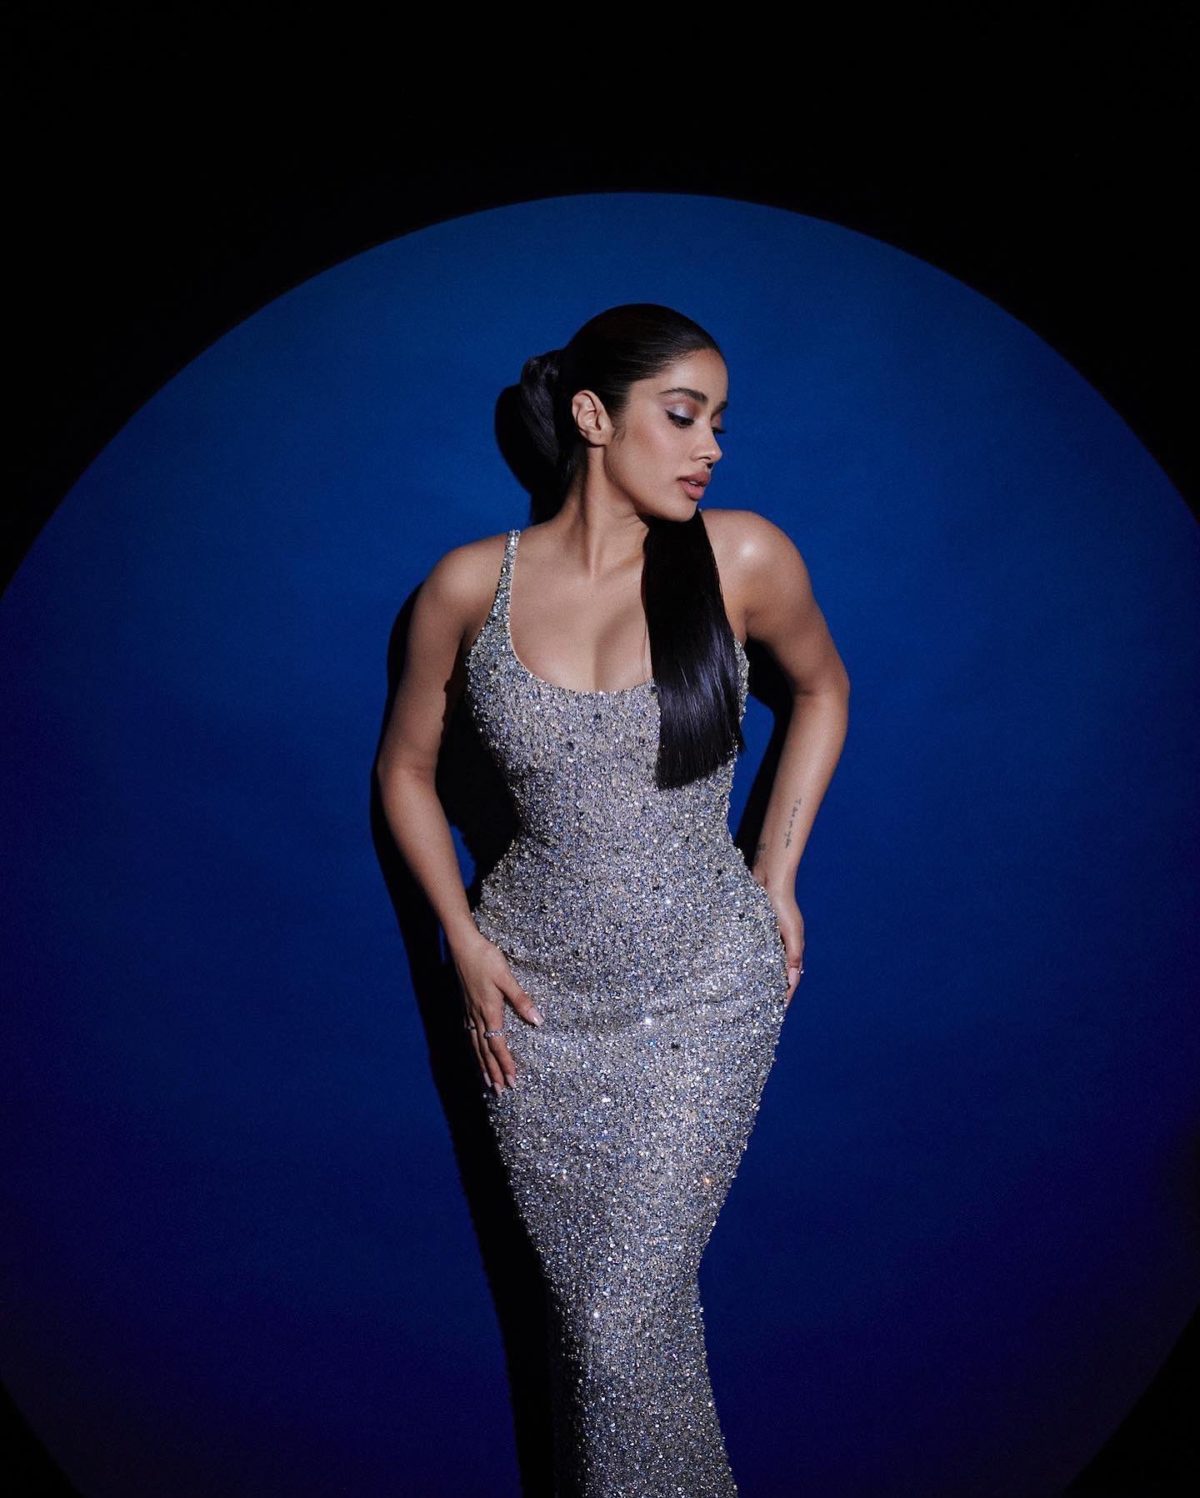 Pic Talk: Janhvi’s Irresistible Curves In Shimmery Gown